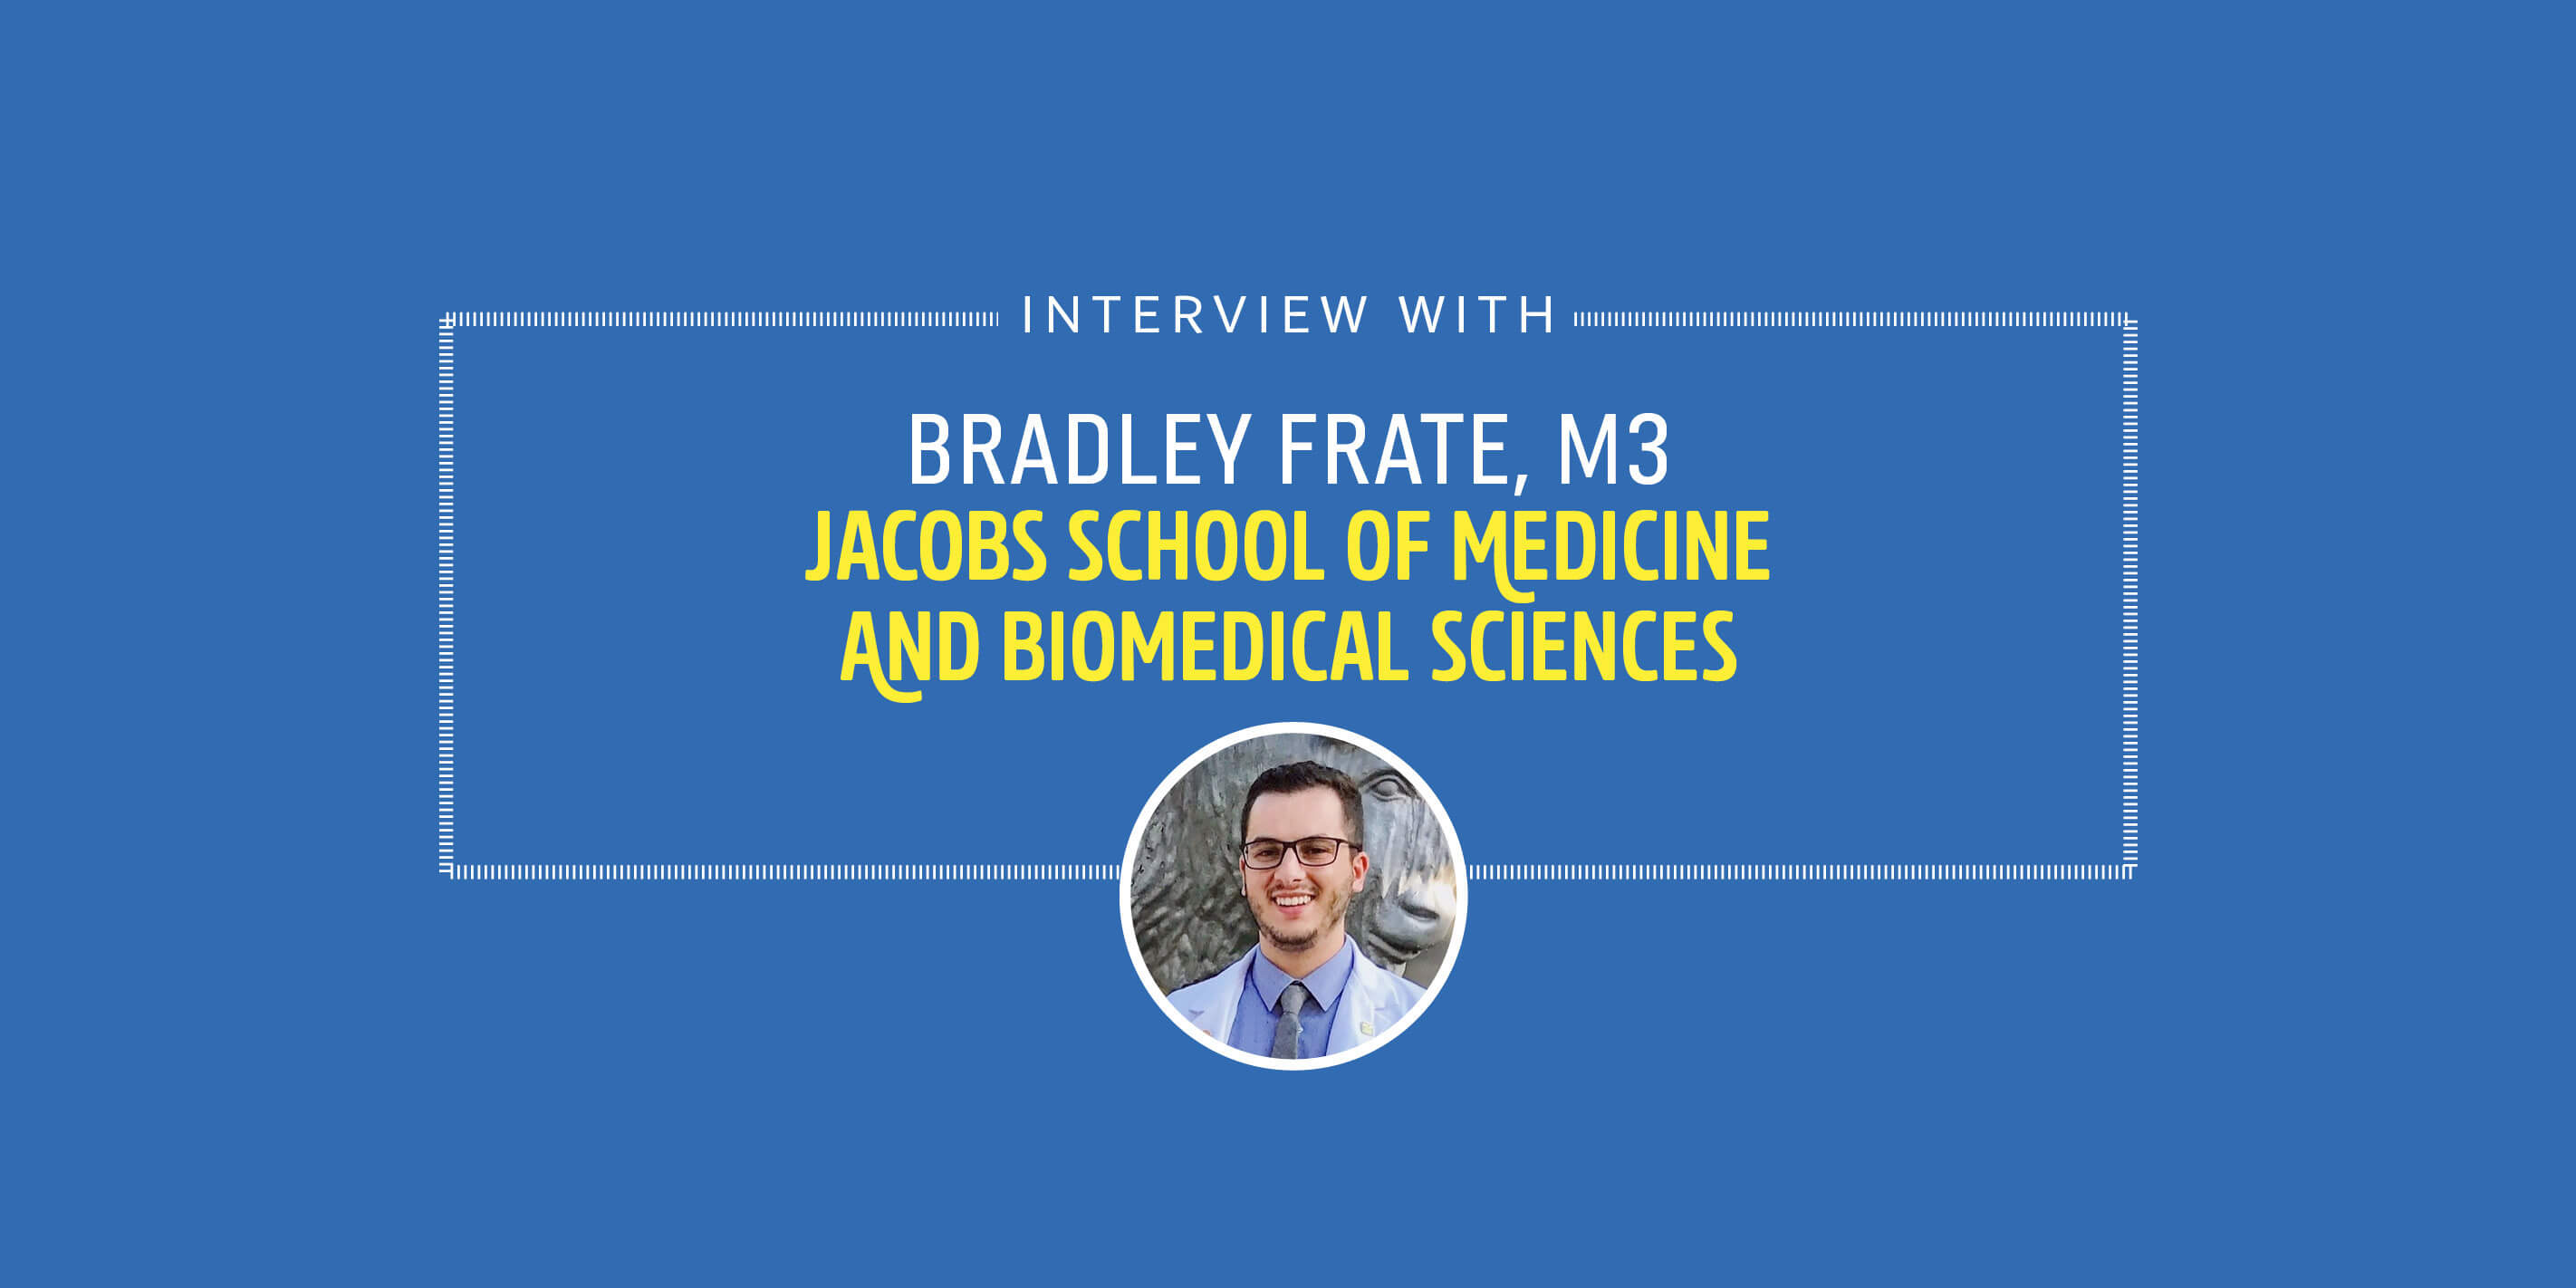 INTERVIEW WITH BRADLEY FRATE, M3 JACOBS SCHOOL OF MEDICINE AND BIOMEDICAL SCIENCES